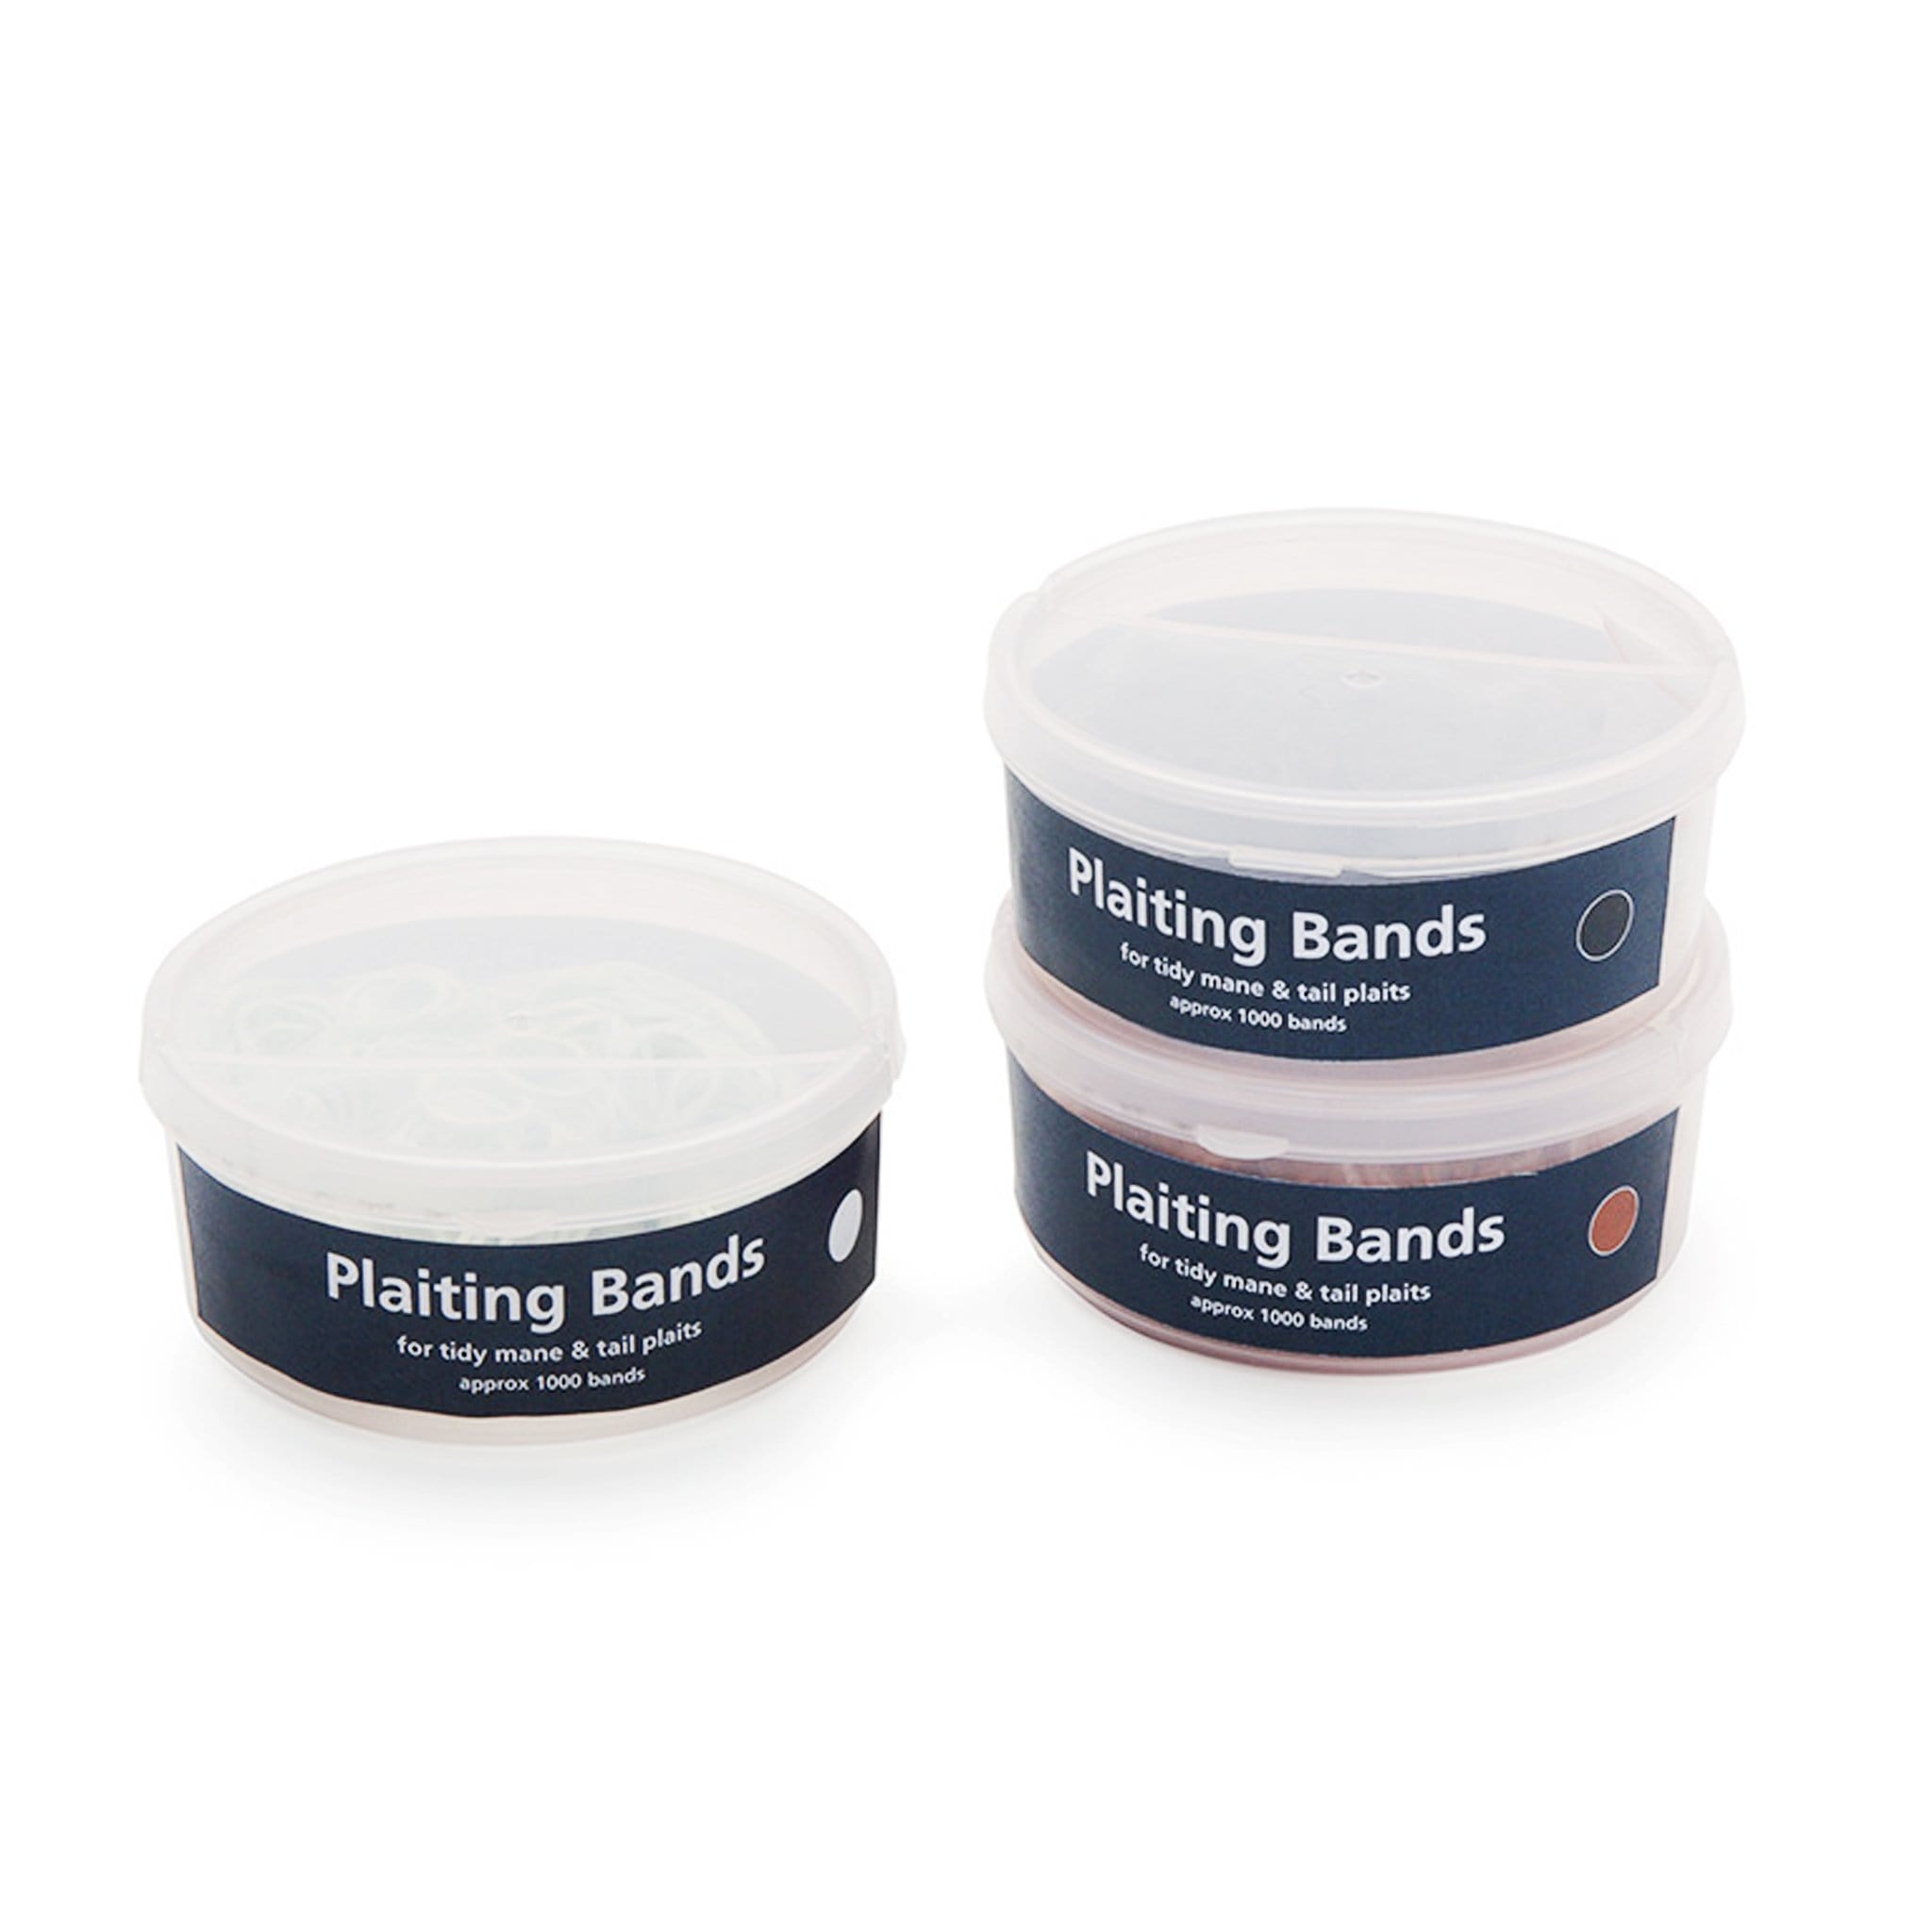 Shires Plaiting Bands in a Tub 1088